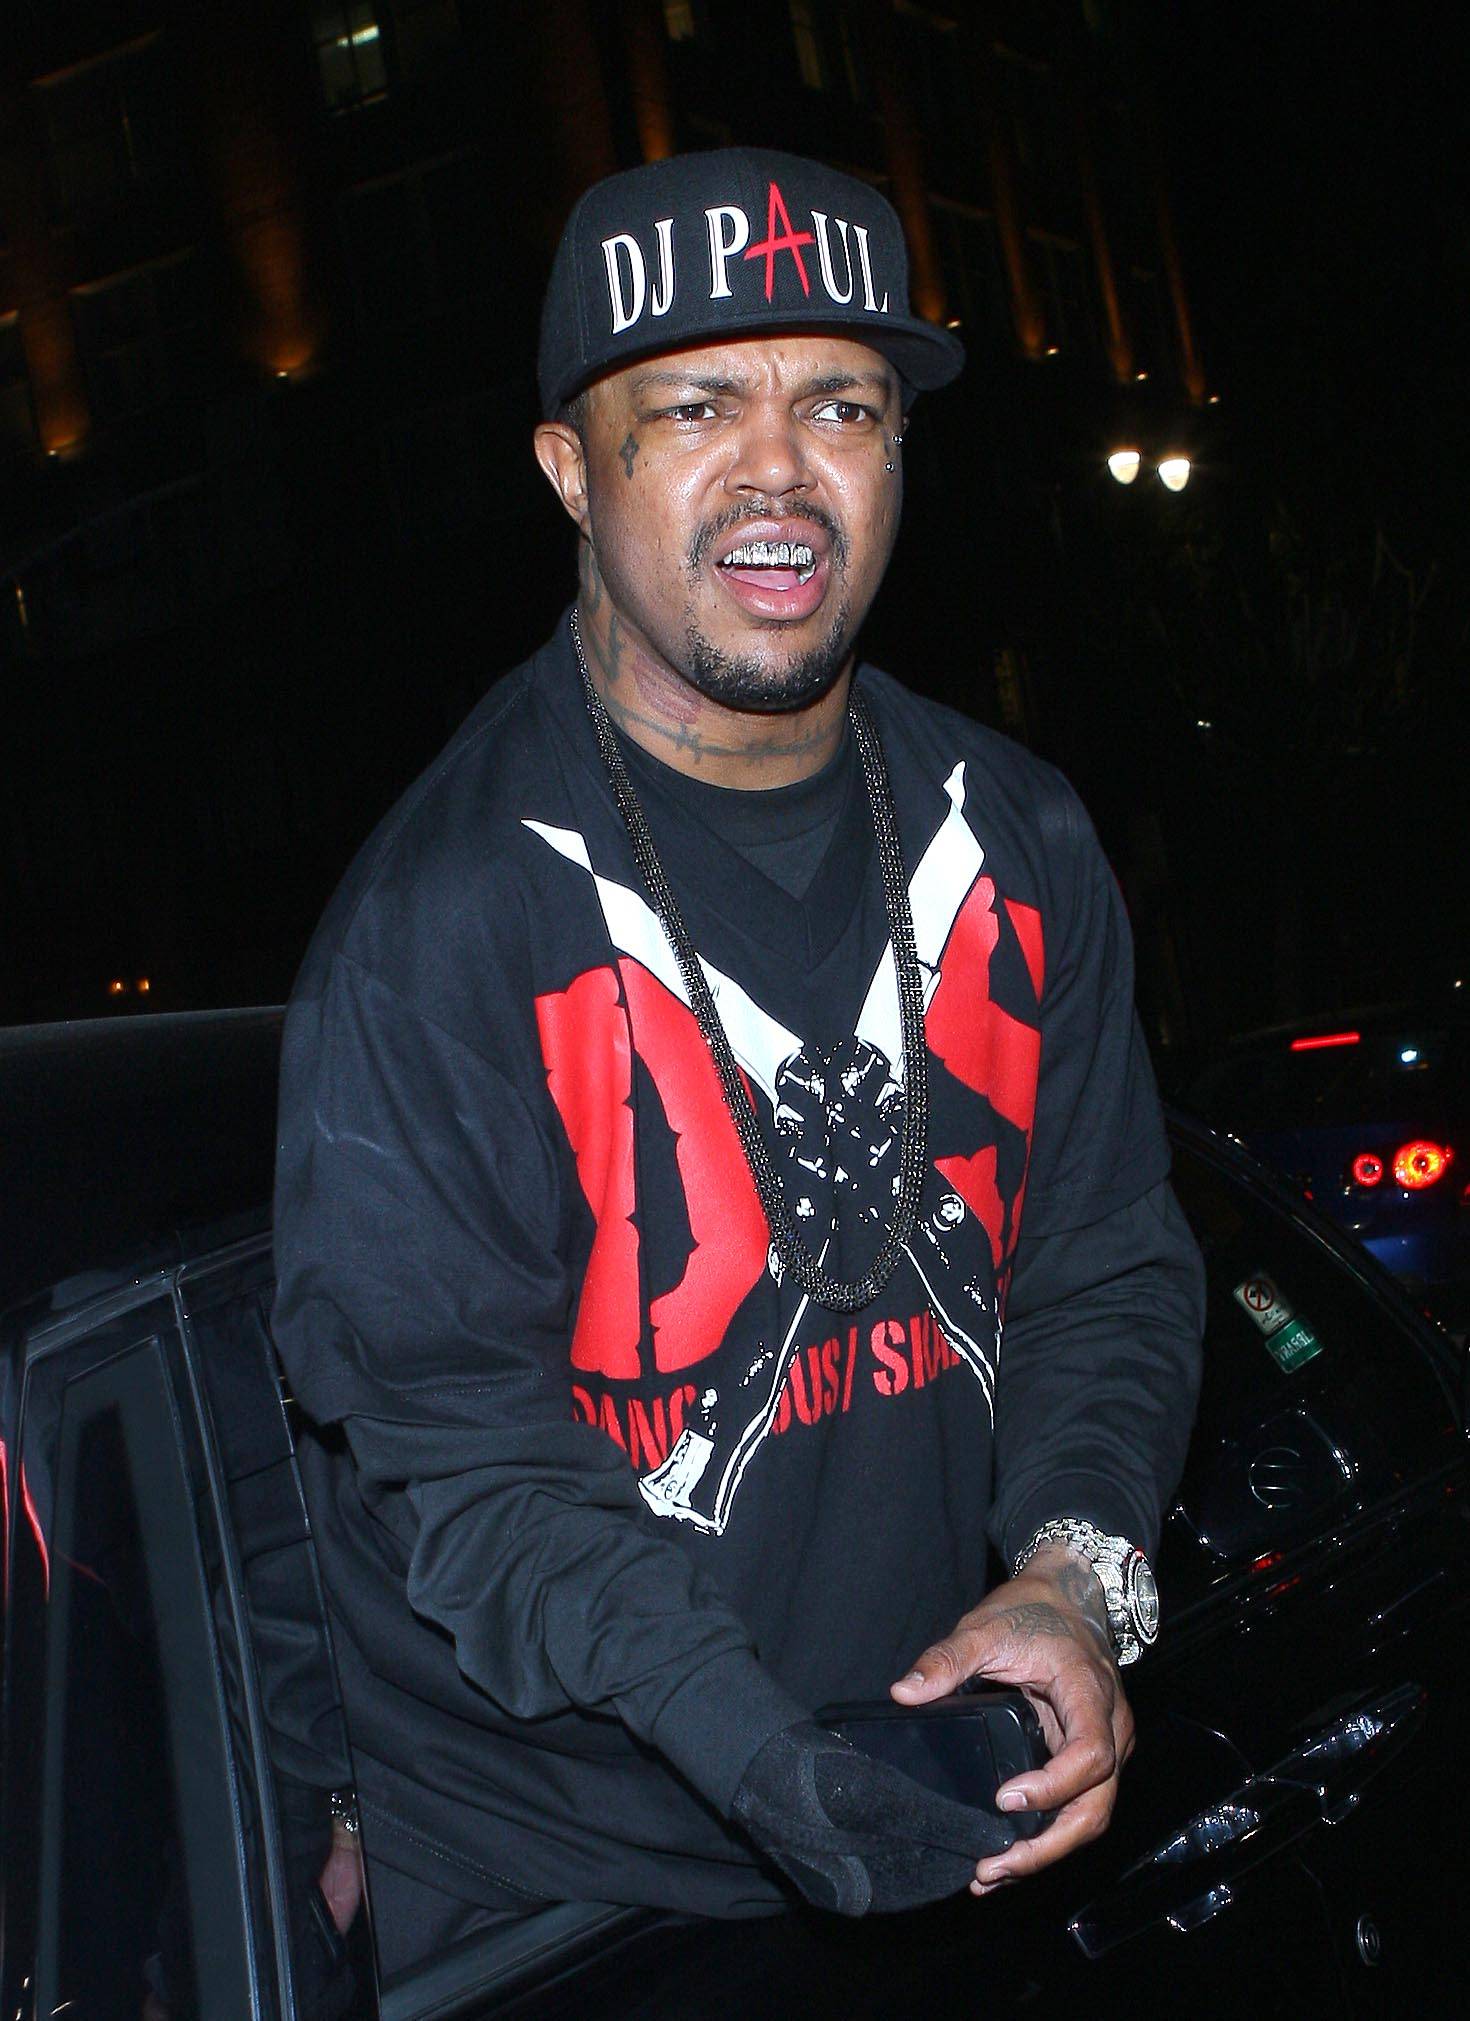 Fandemonium - Three 6 Mafia’s DJ Paul greets fans during a late night drive-through in Los Angeles.(Photo: Fame Pictures, Inc)